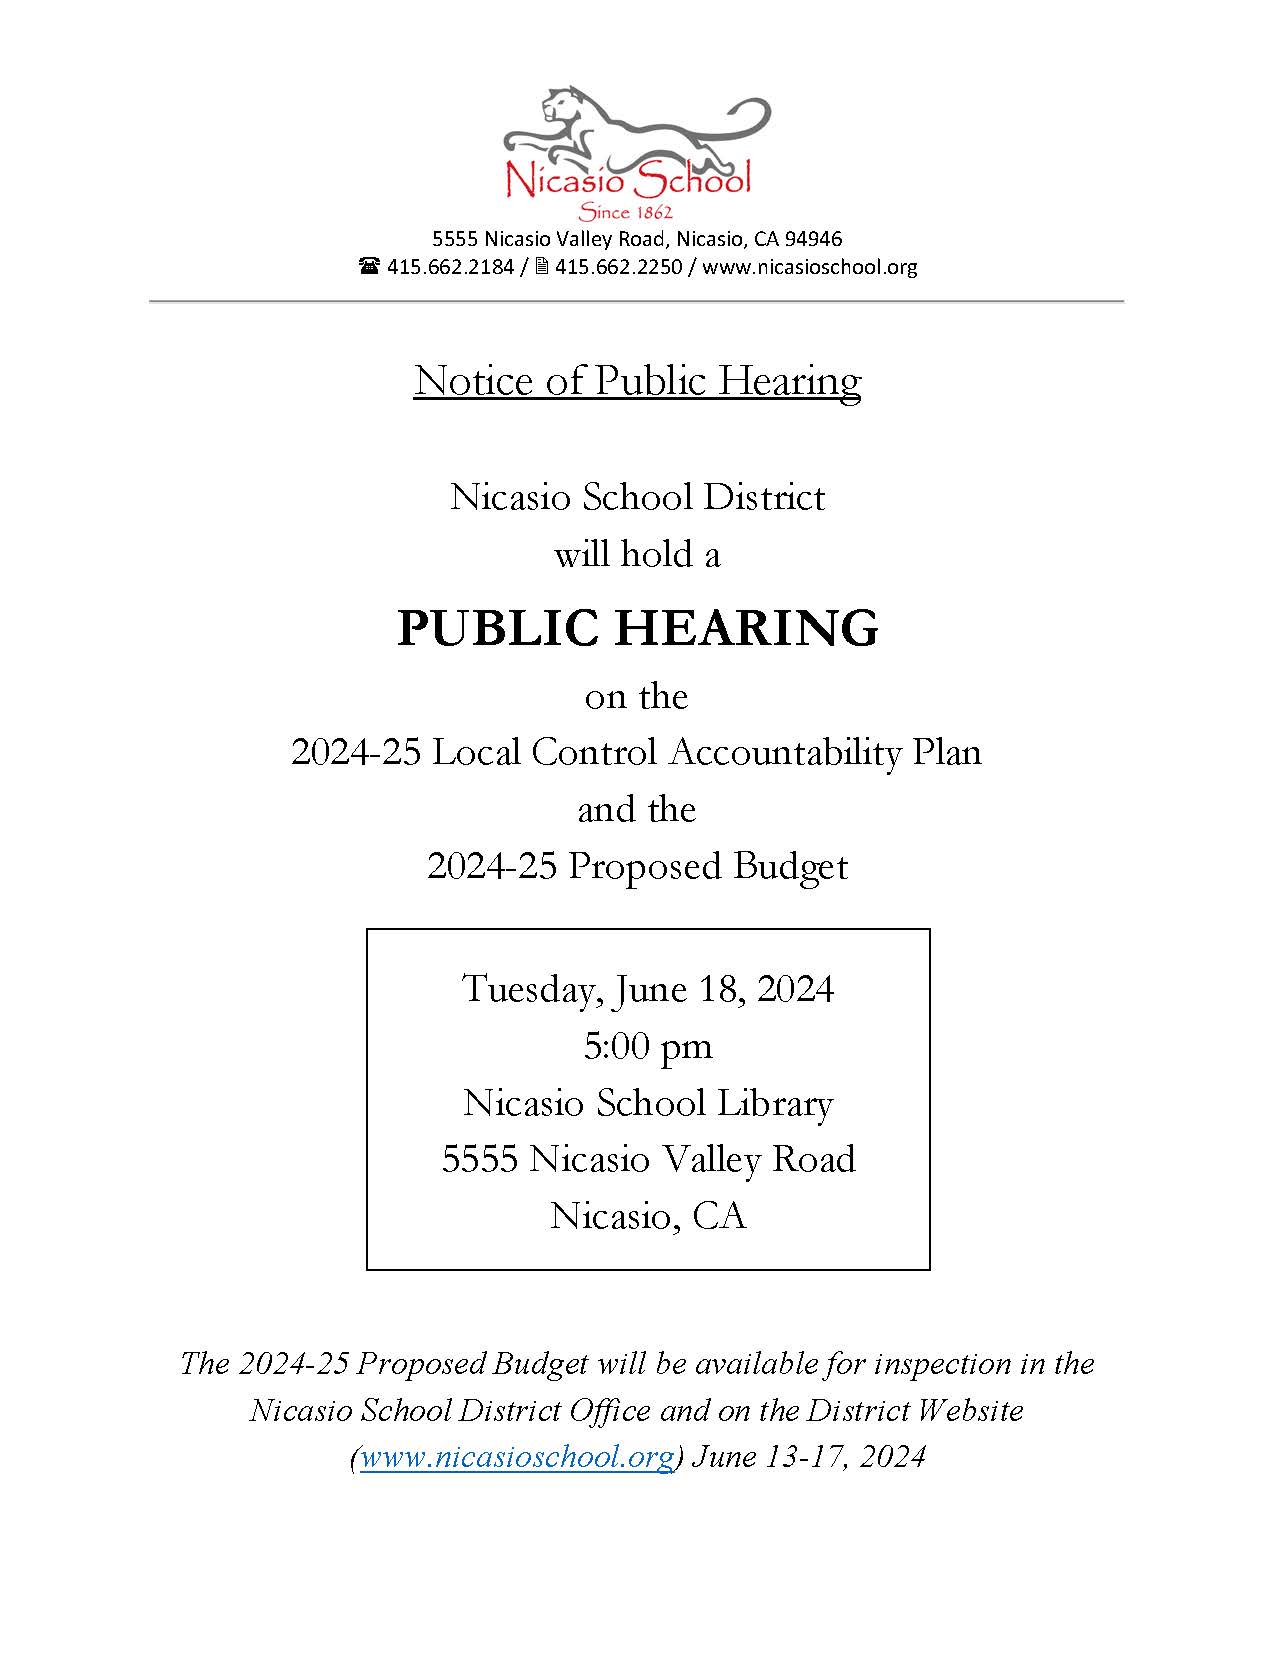 Notice of Public Hearing LCAP and Proposed Budget June 2024